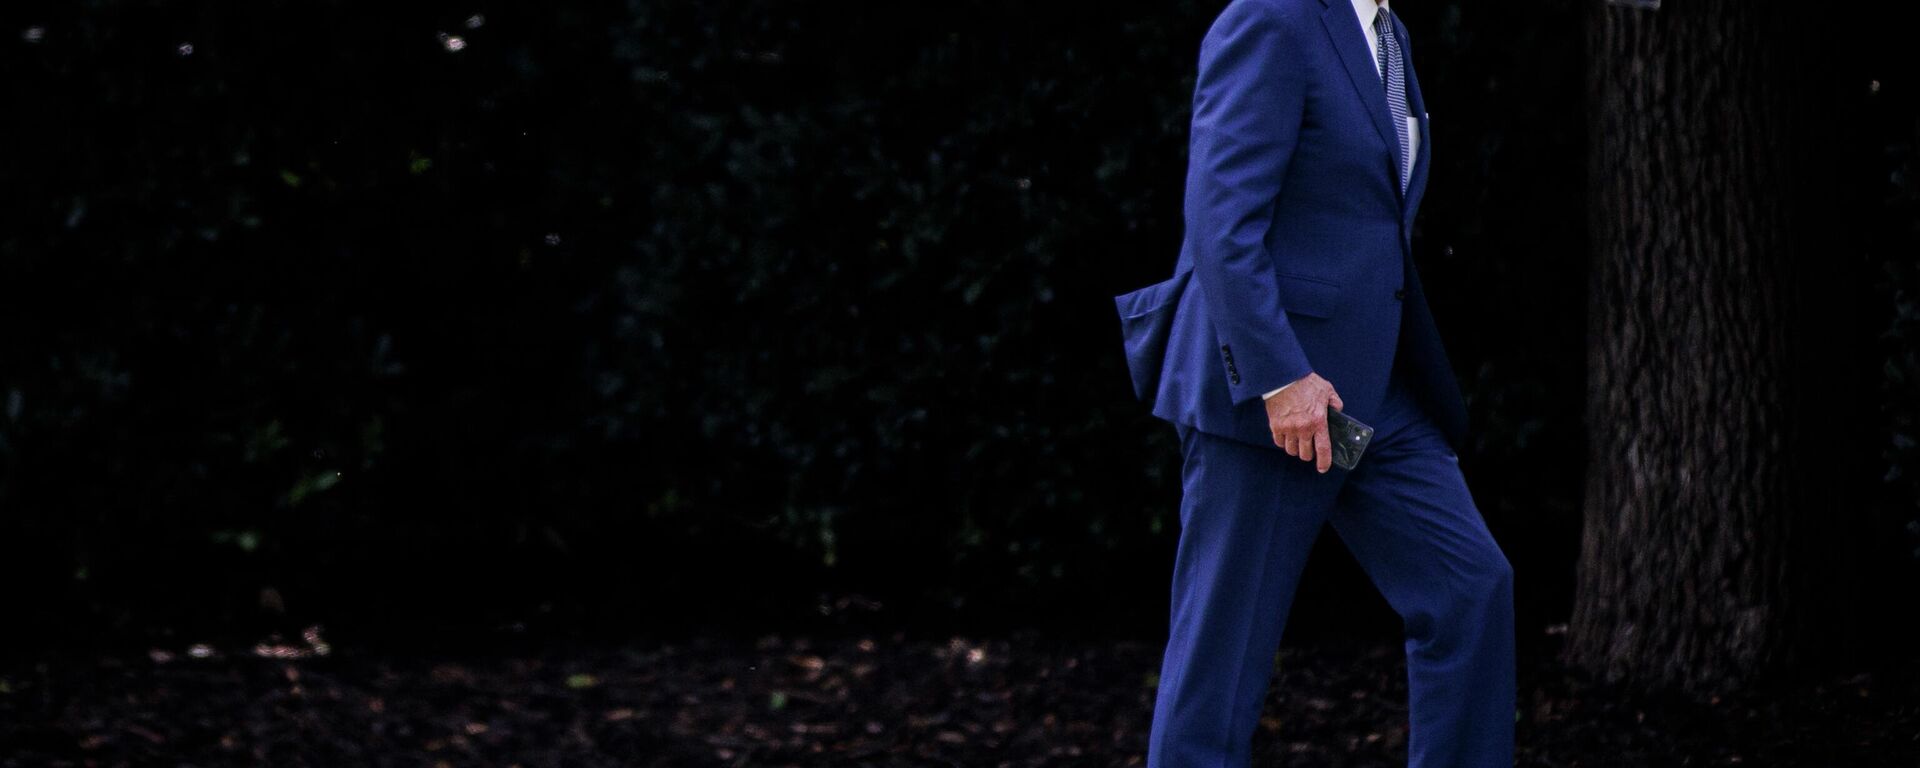 US President Joe Biden walks to the Oval Office in Washington DC, after visiting the Central Intelligence Agency (CIA) headquarters in Langley, where he congratulated the Agency and staff on the 75th anniversary of its founding on July 8, 2022 - Sputnik International, 1920, 11.07.2022